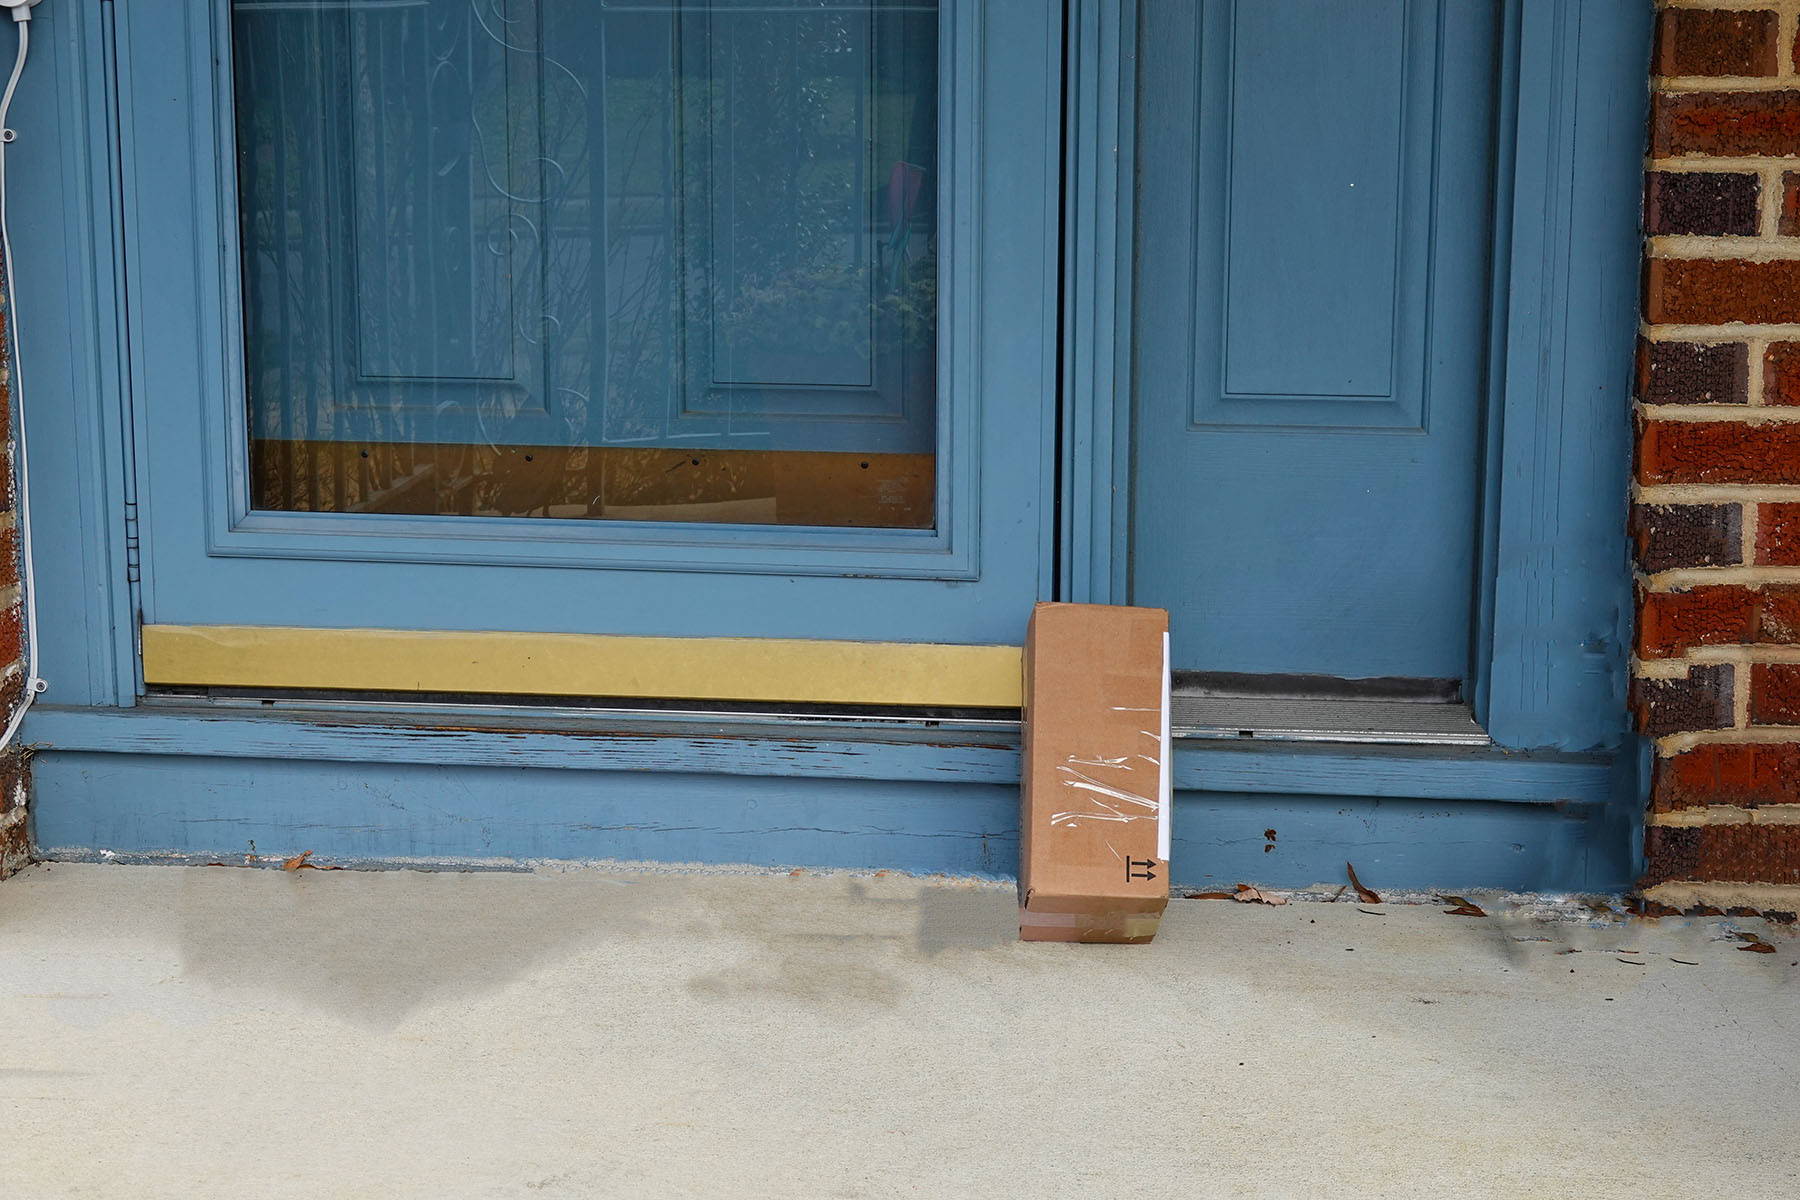 Package at front door of house